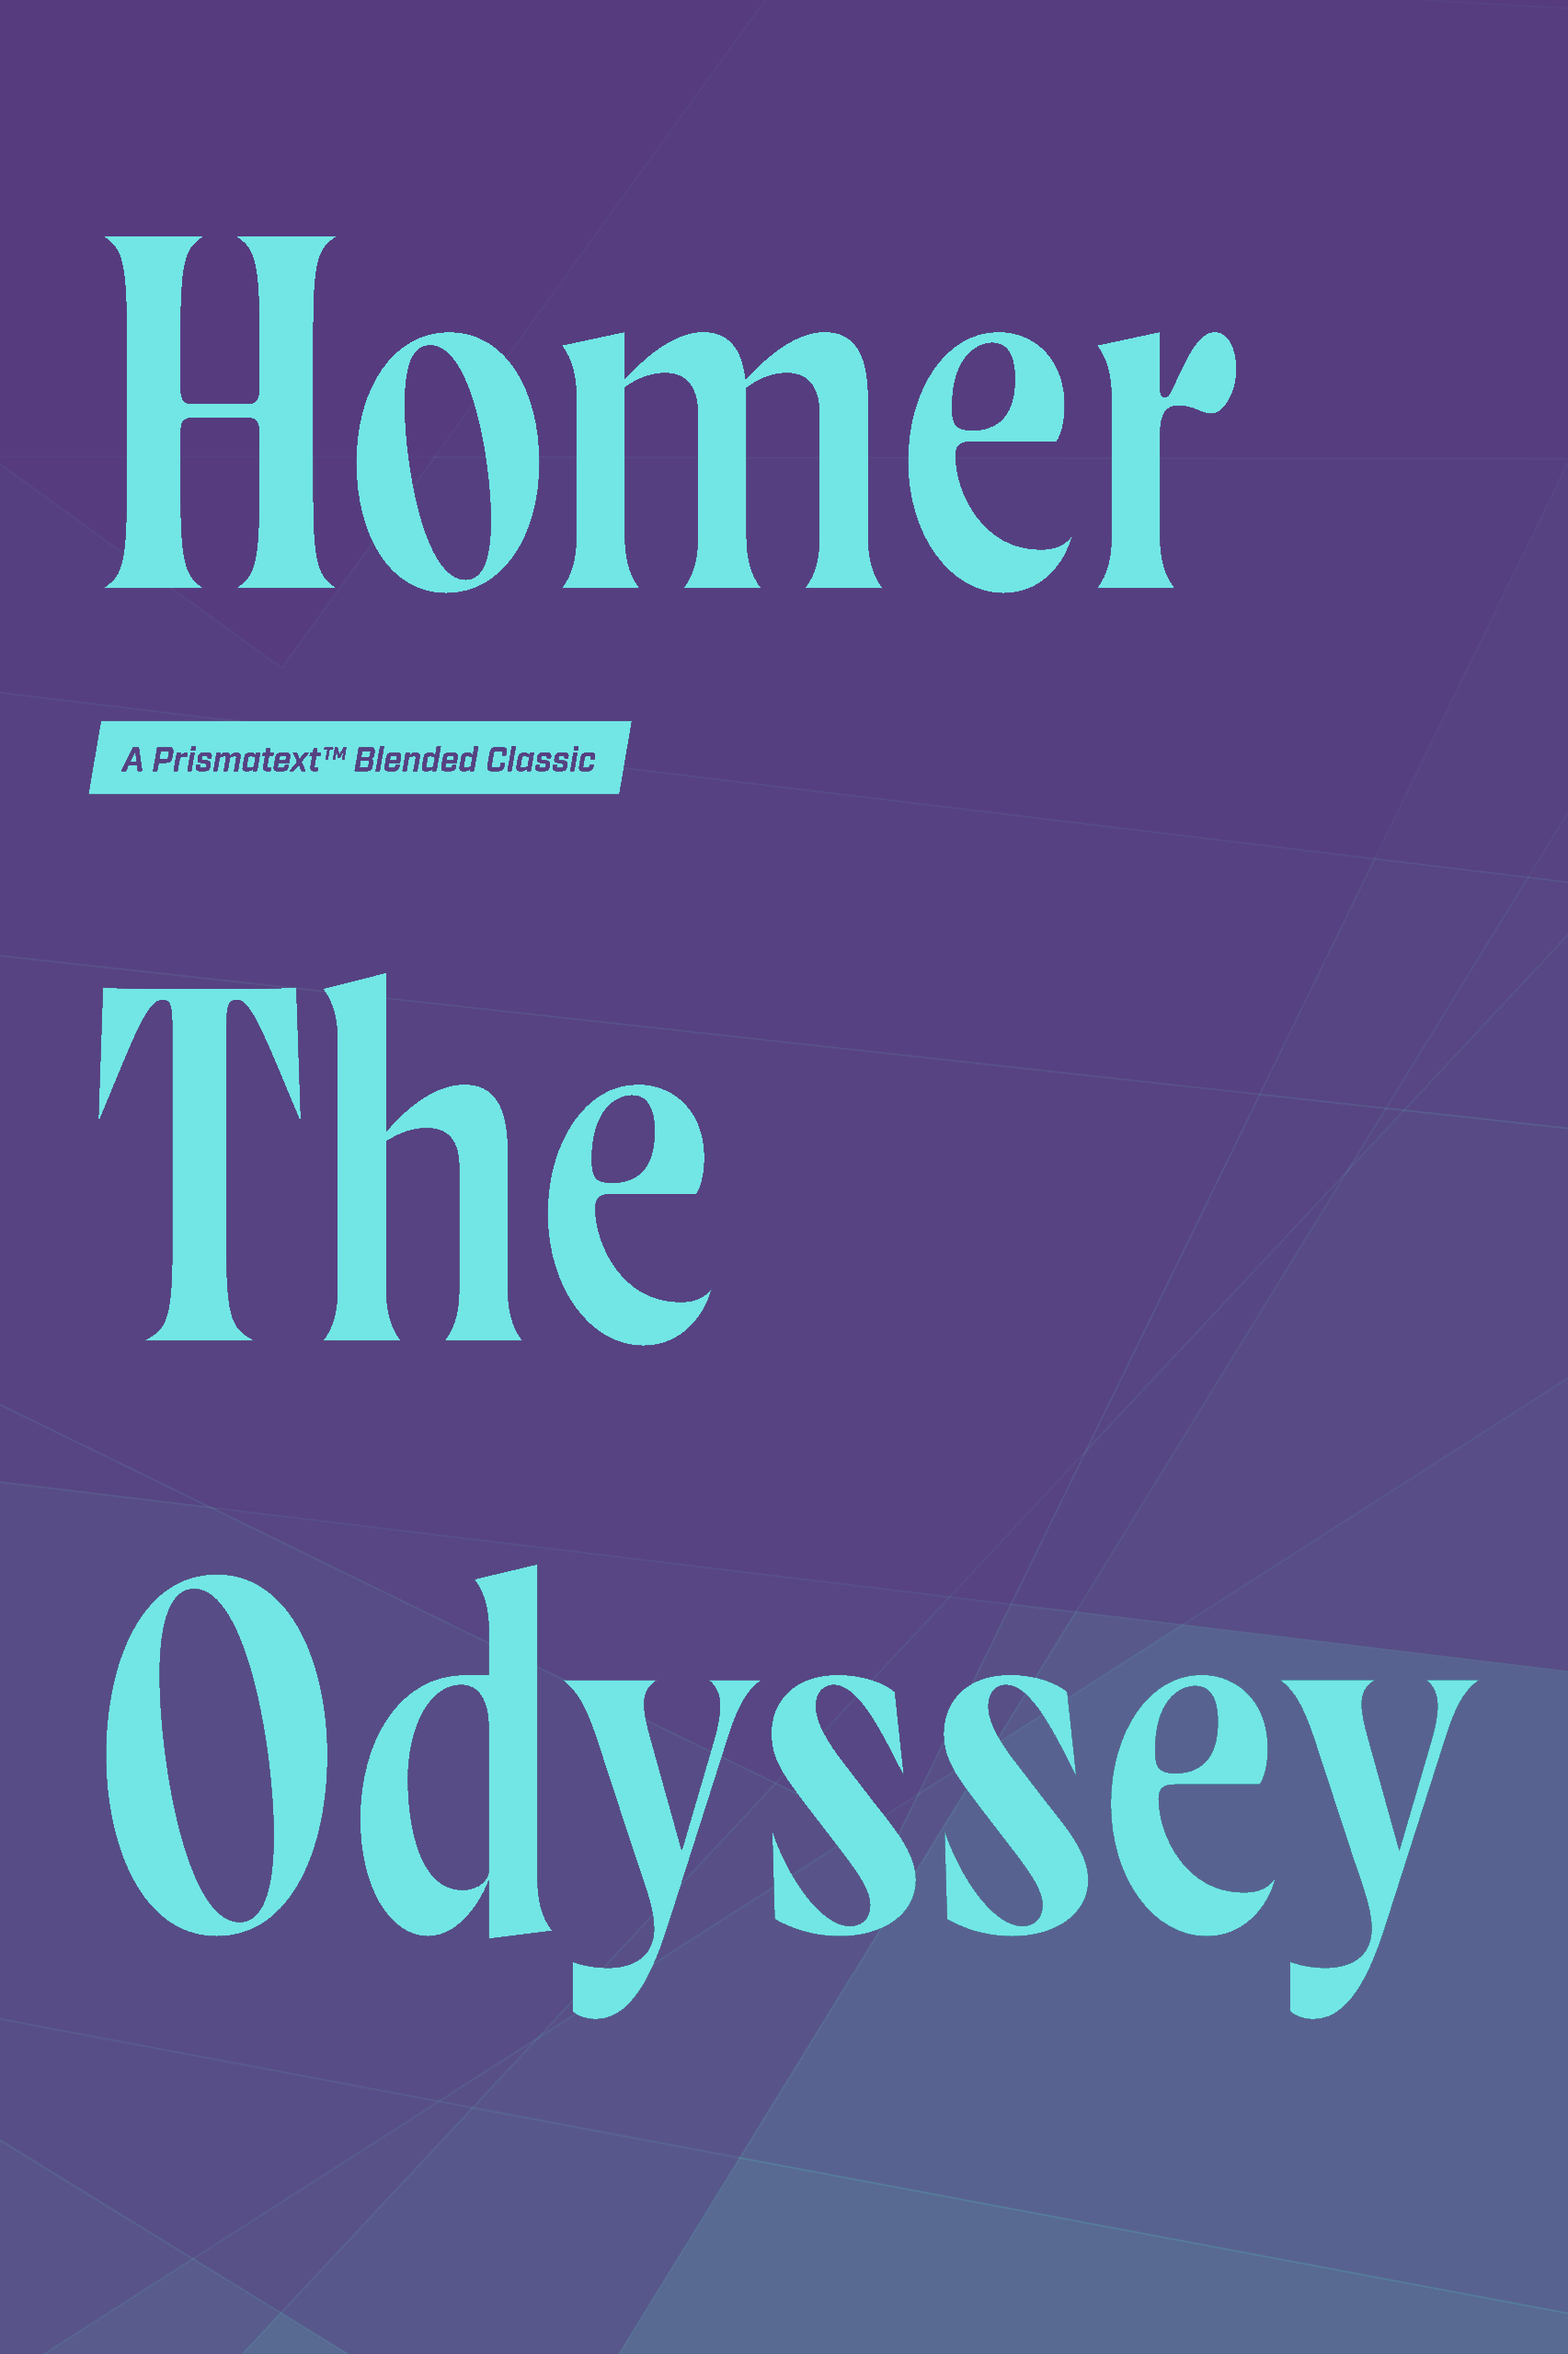 The Odyssey by Homer 